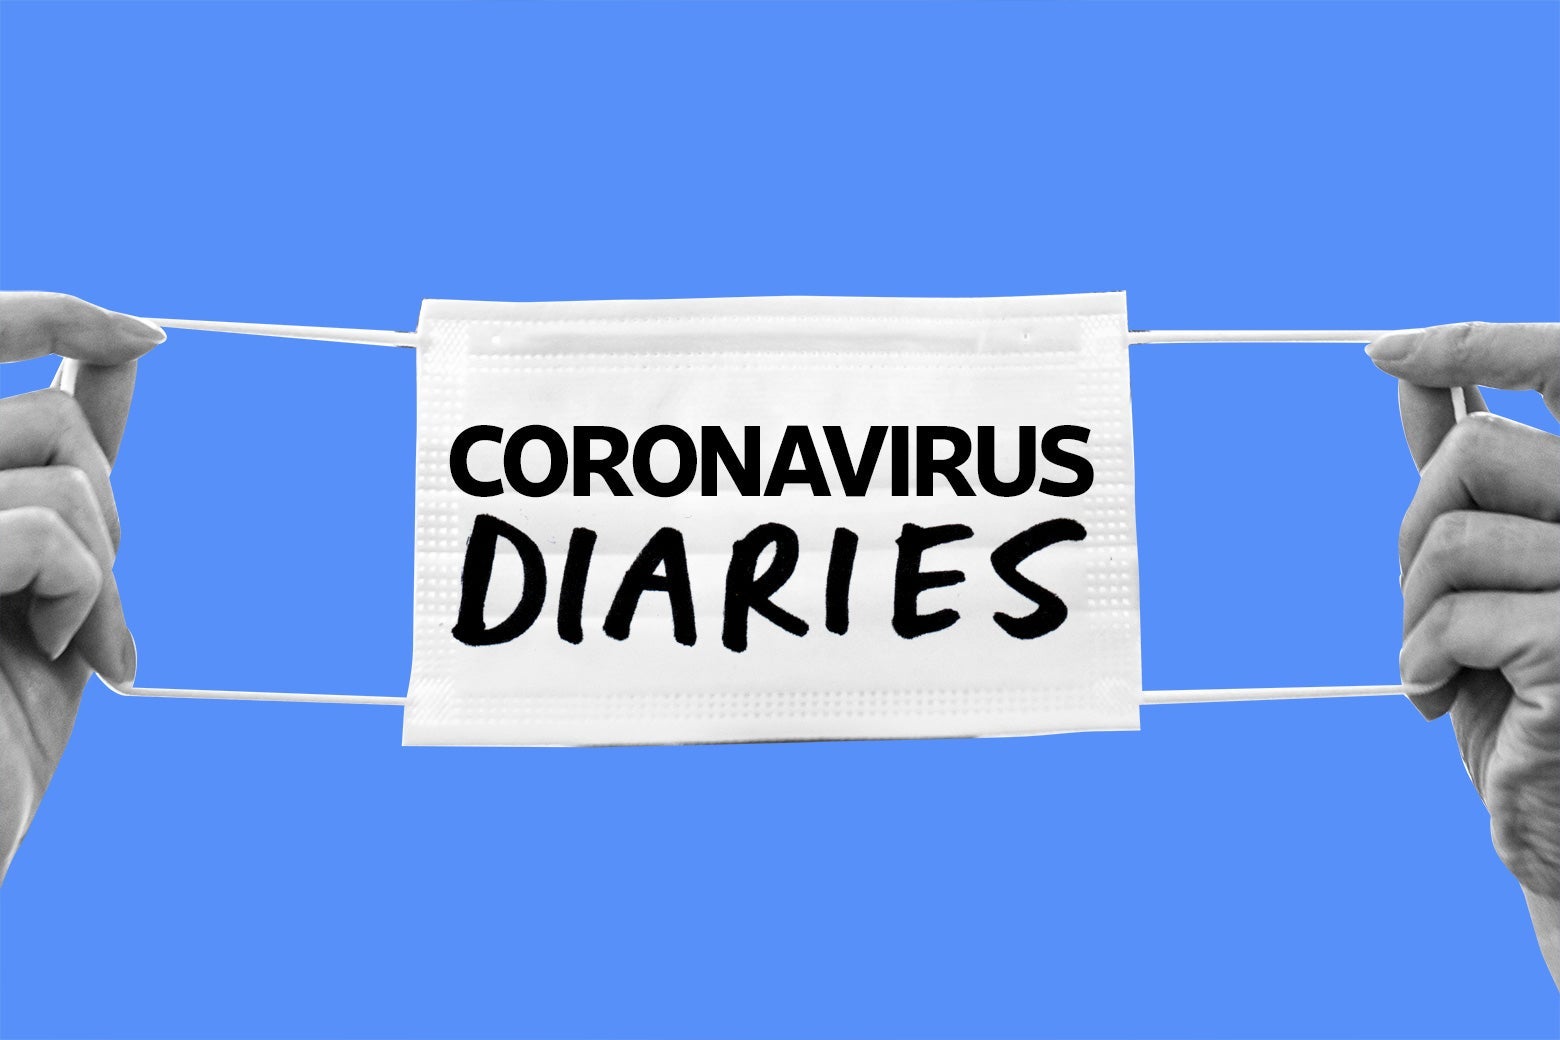 hands holding up a surgical mask that says "coronavirus diaries" 